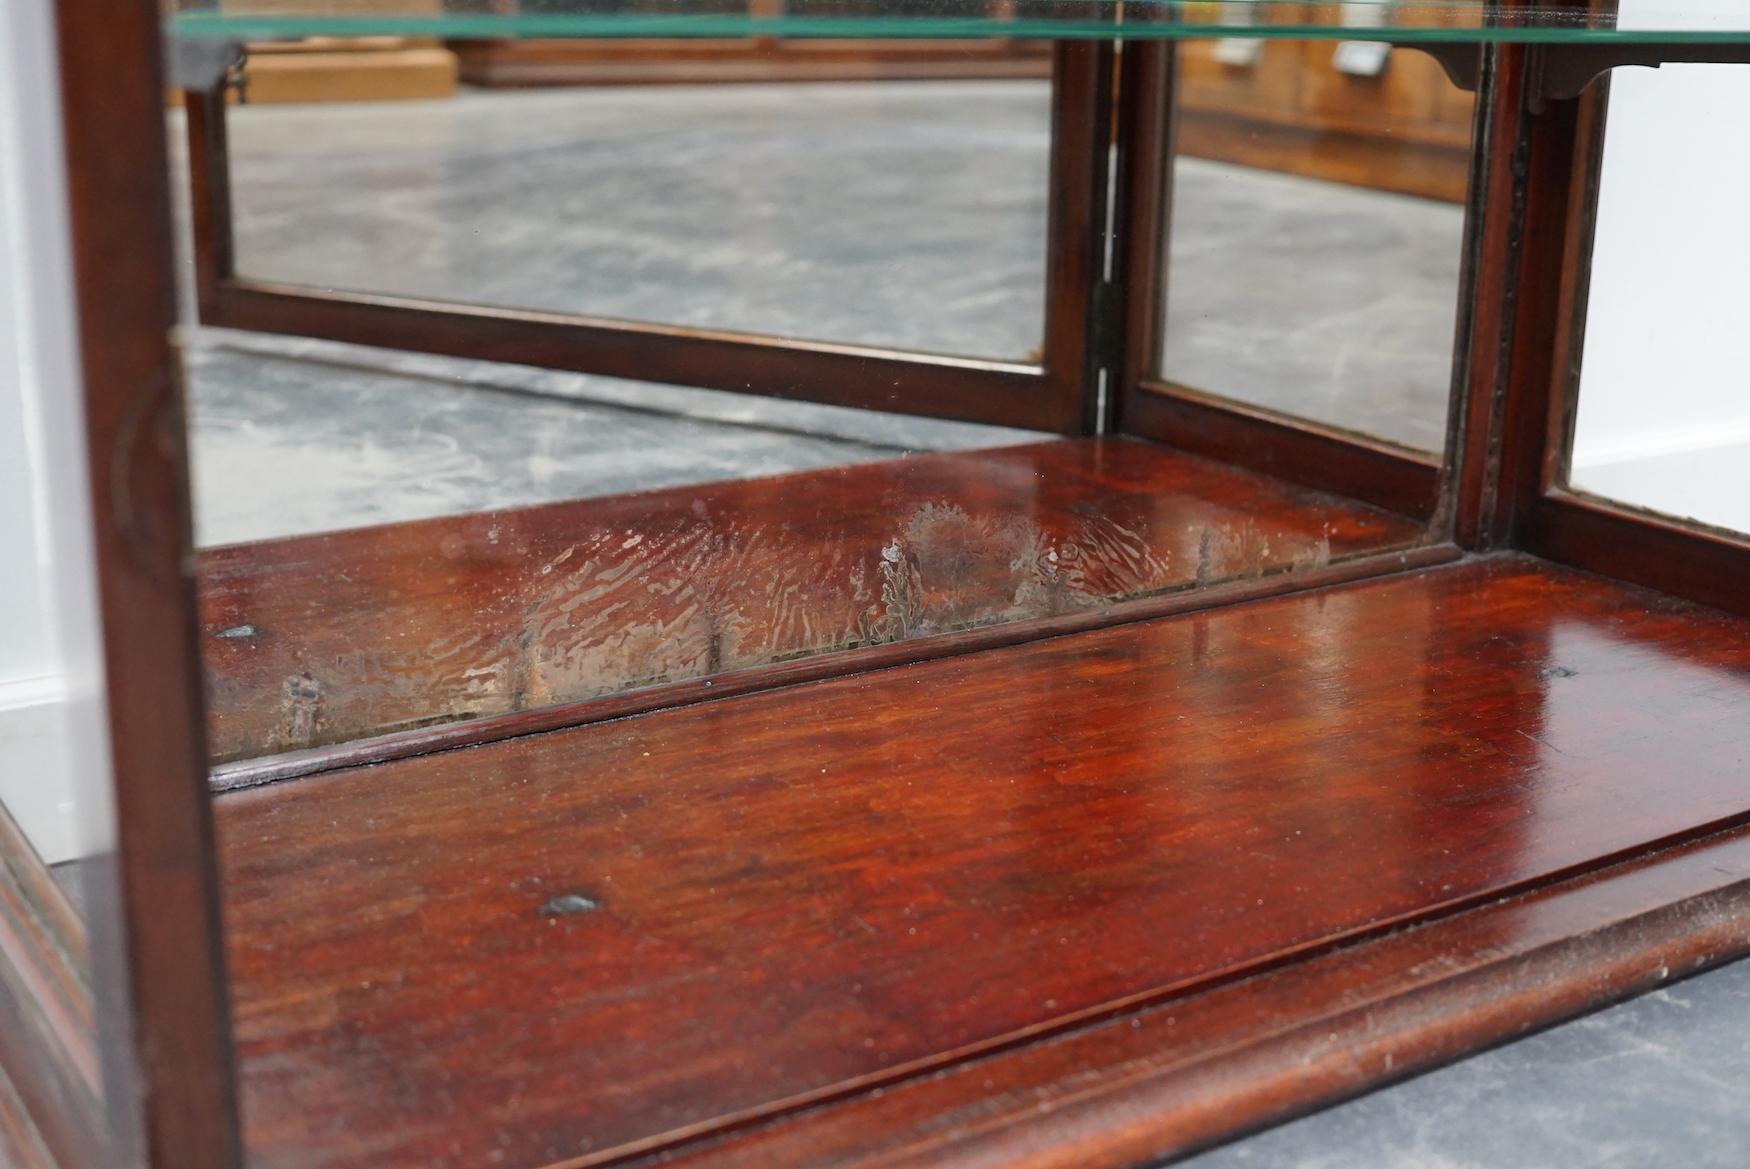 Victorian Mahogany Museum / Shop Display Cabinet or Vitrine, Late 19th Century For Sale 1